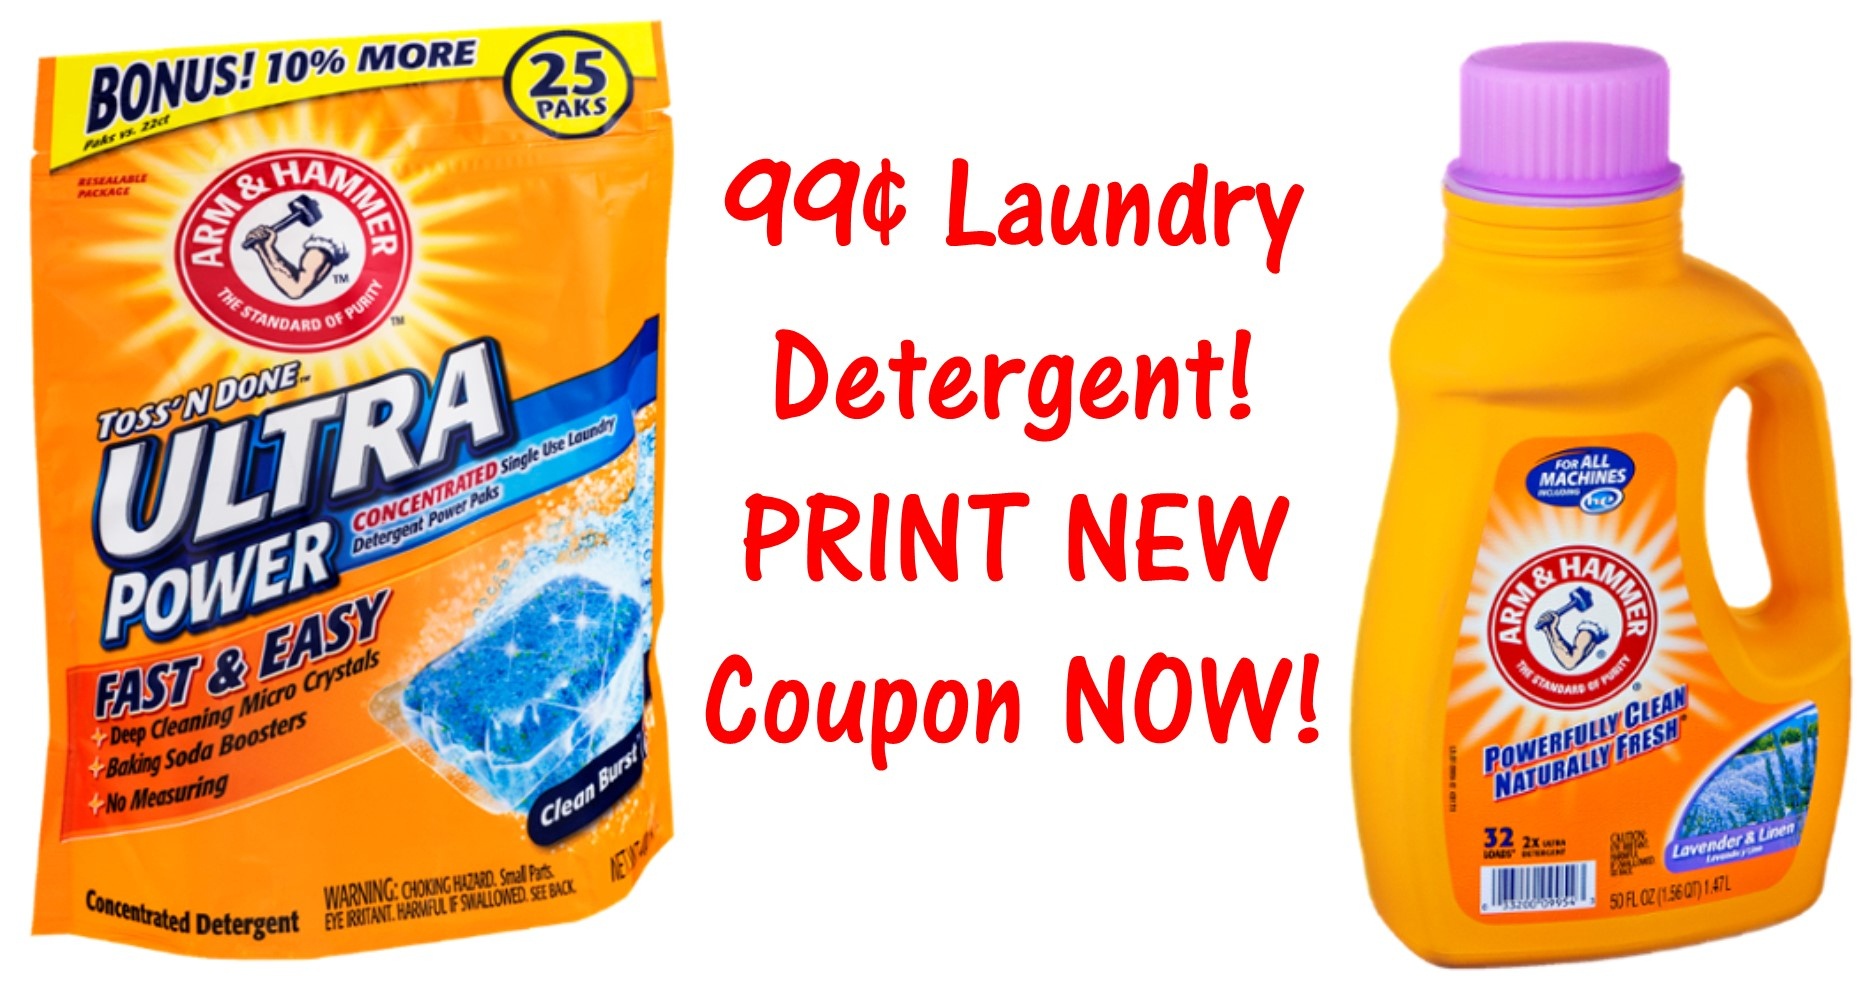 New Arm &amp;amp; Hammer Printable Coupons = $0.99 Laundry Detergent! - Free Printable Arm And Hammer Coupons